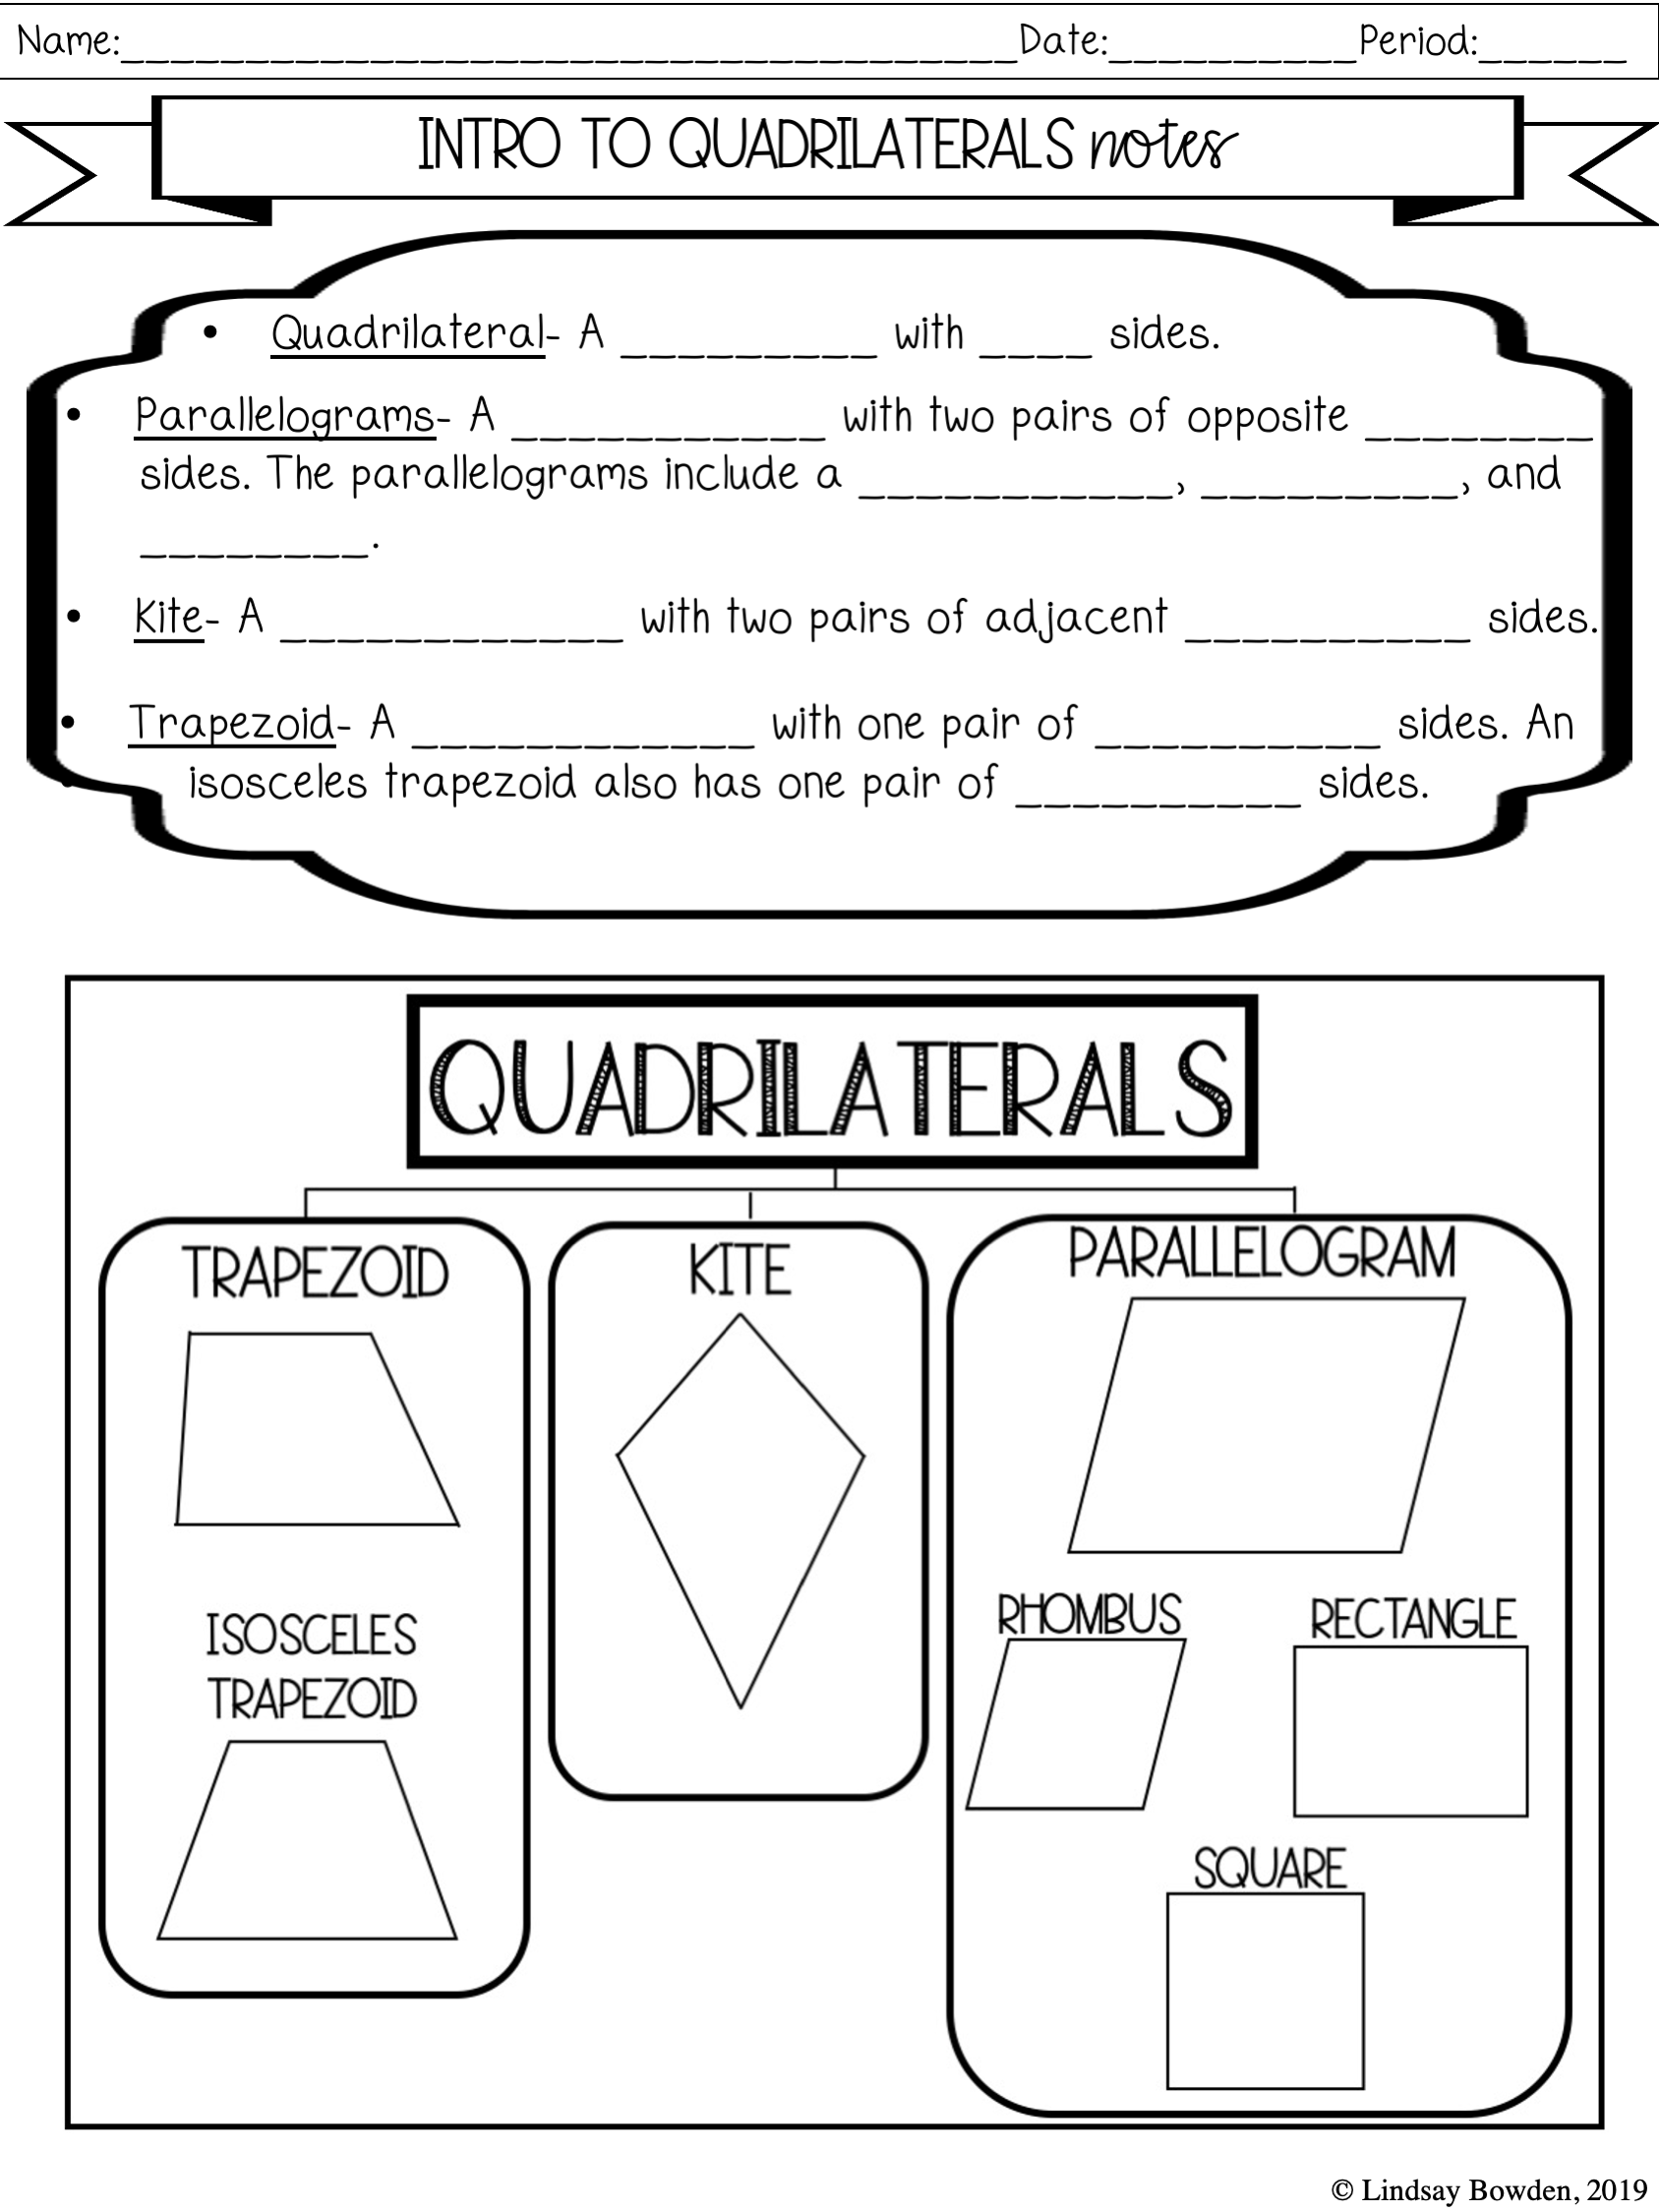 Quadrilaterals Notes And Worksheets Lindsay Bowden